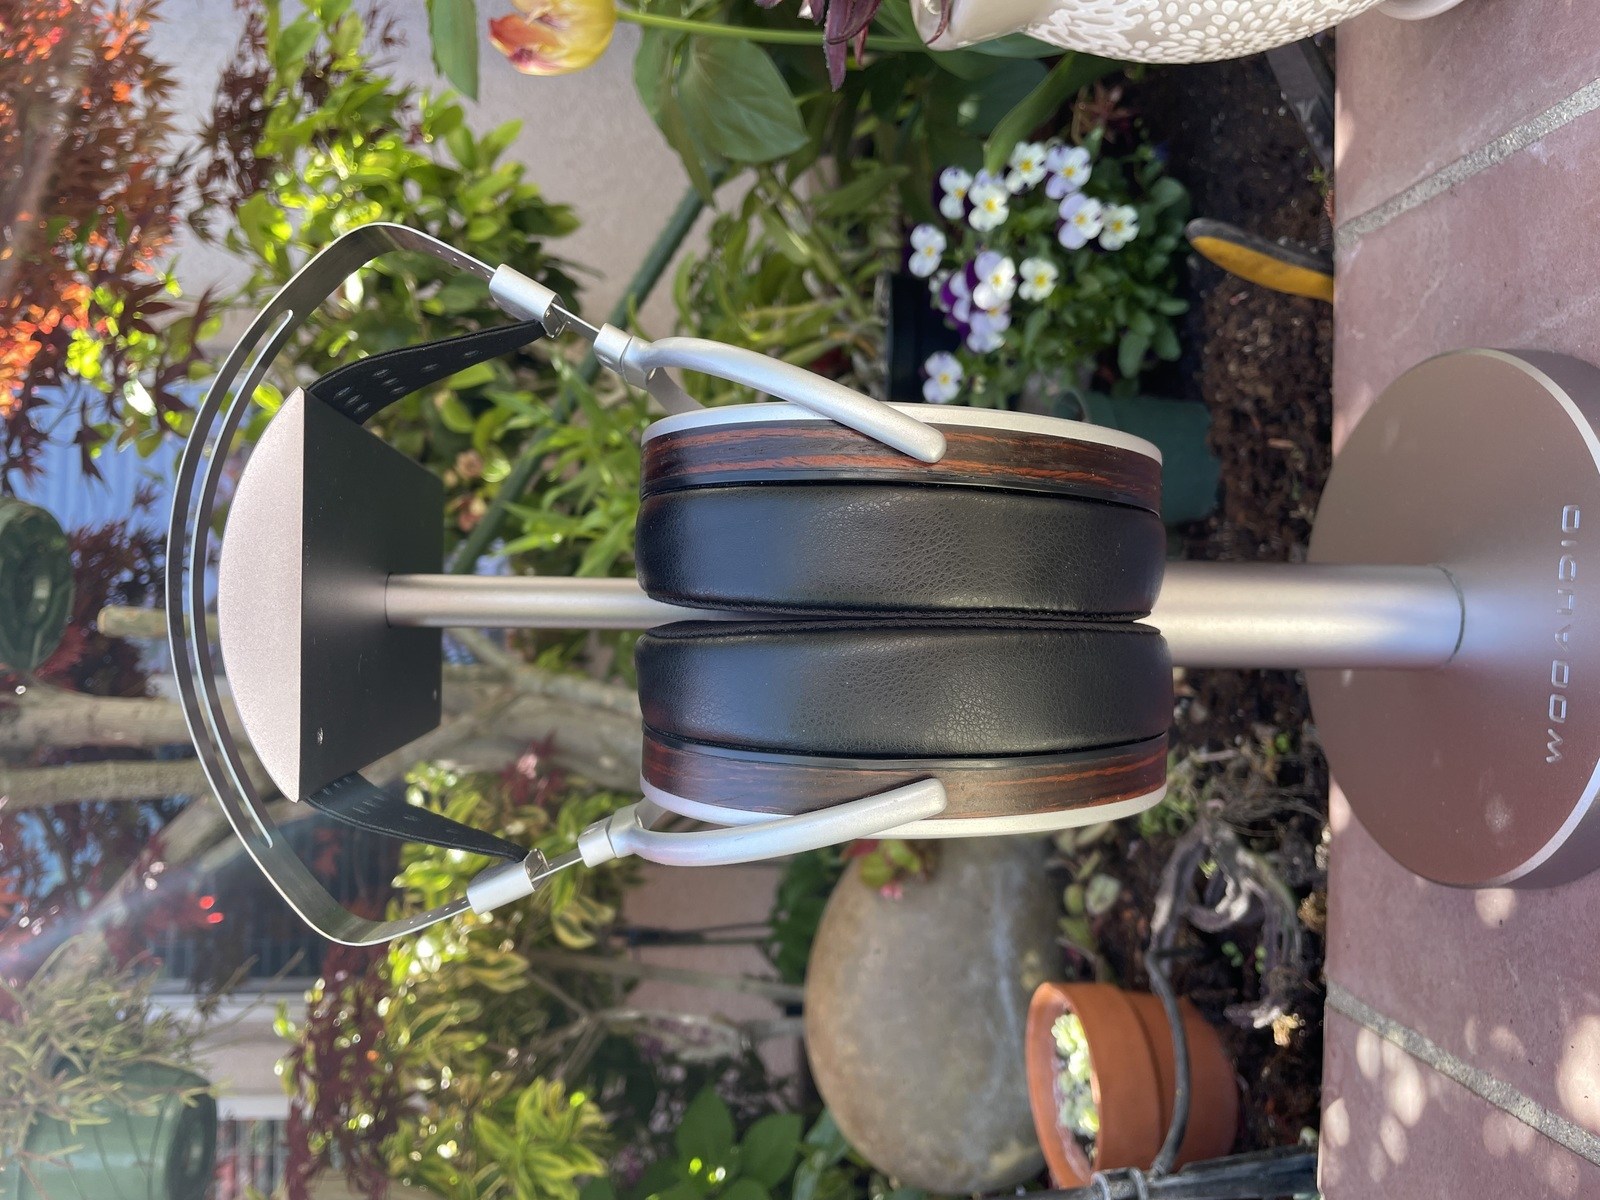 HIFIMAN HE1000se on a Woo Audio headphone stand next to a garden with pink flowers